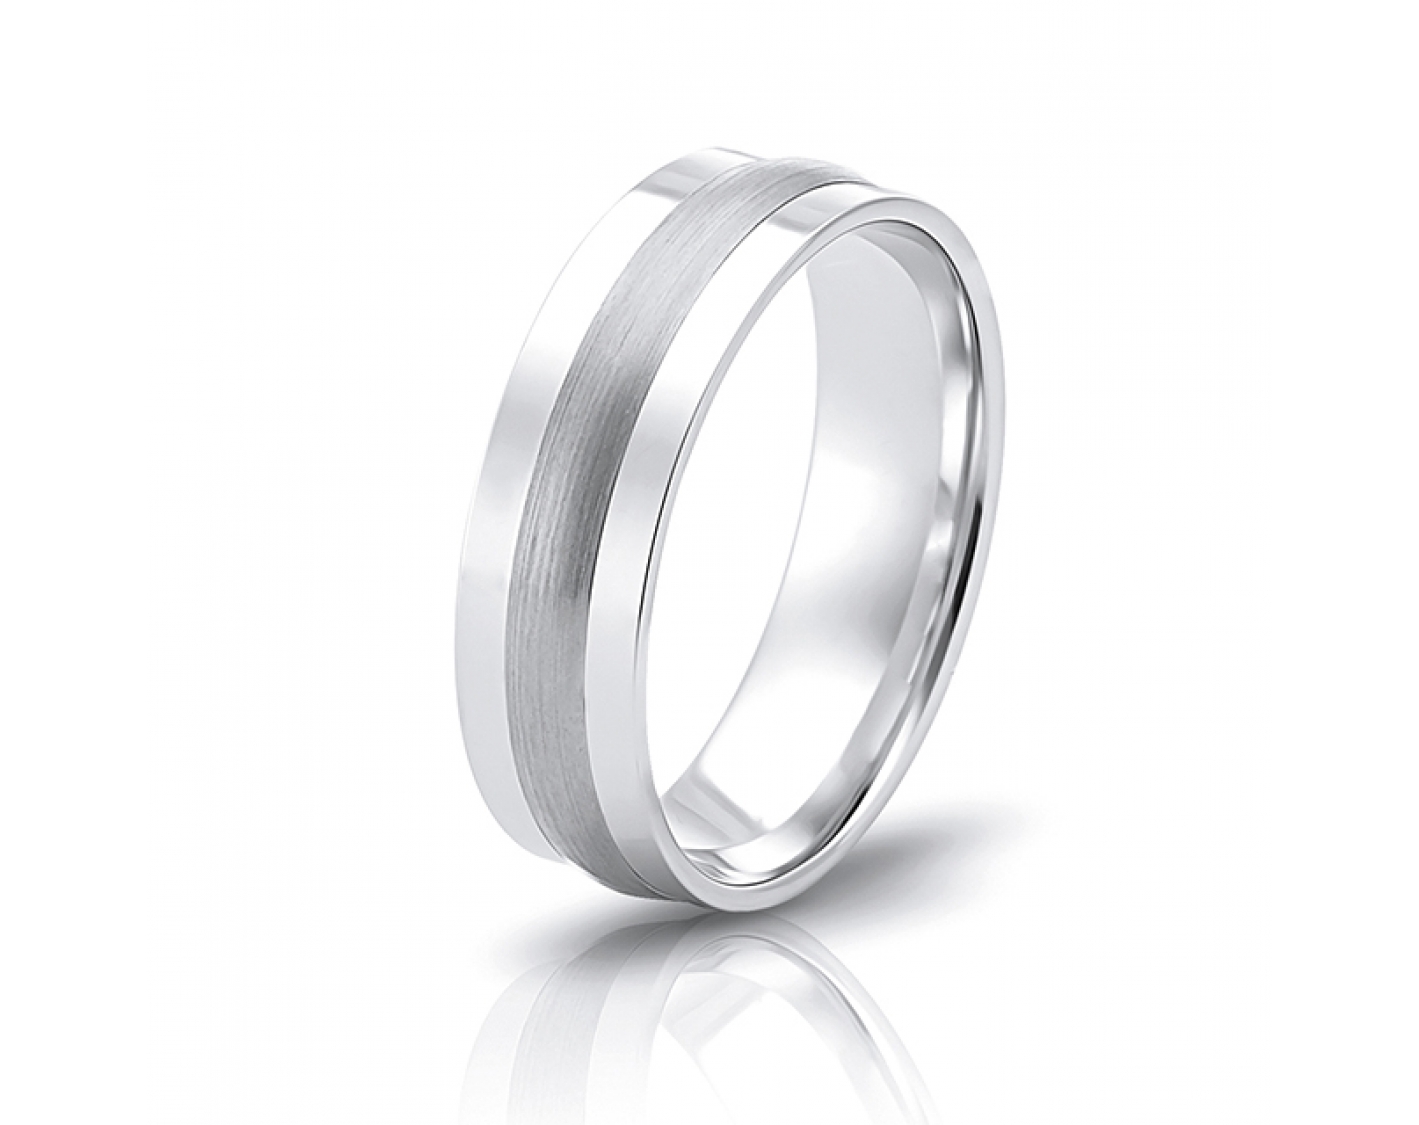 18k white gold 6mm two-toned* wedding band with middle matte line and shiny edges